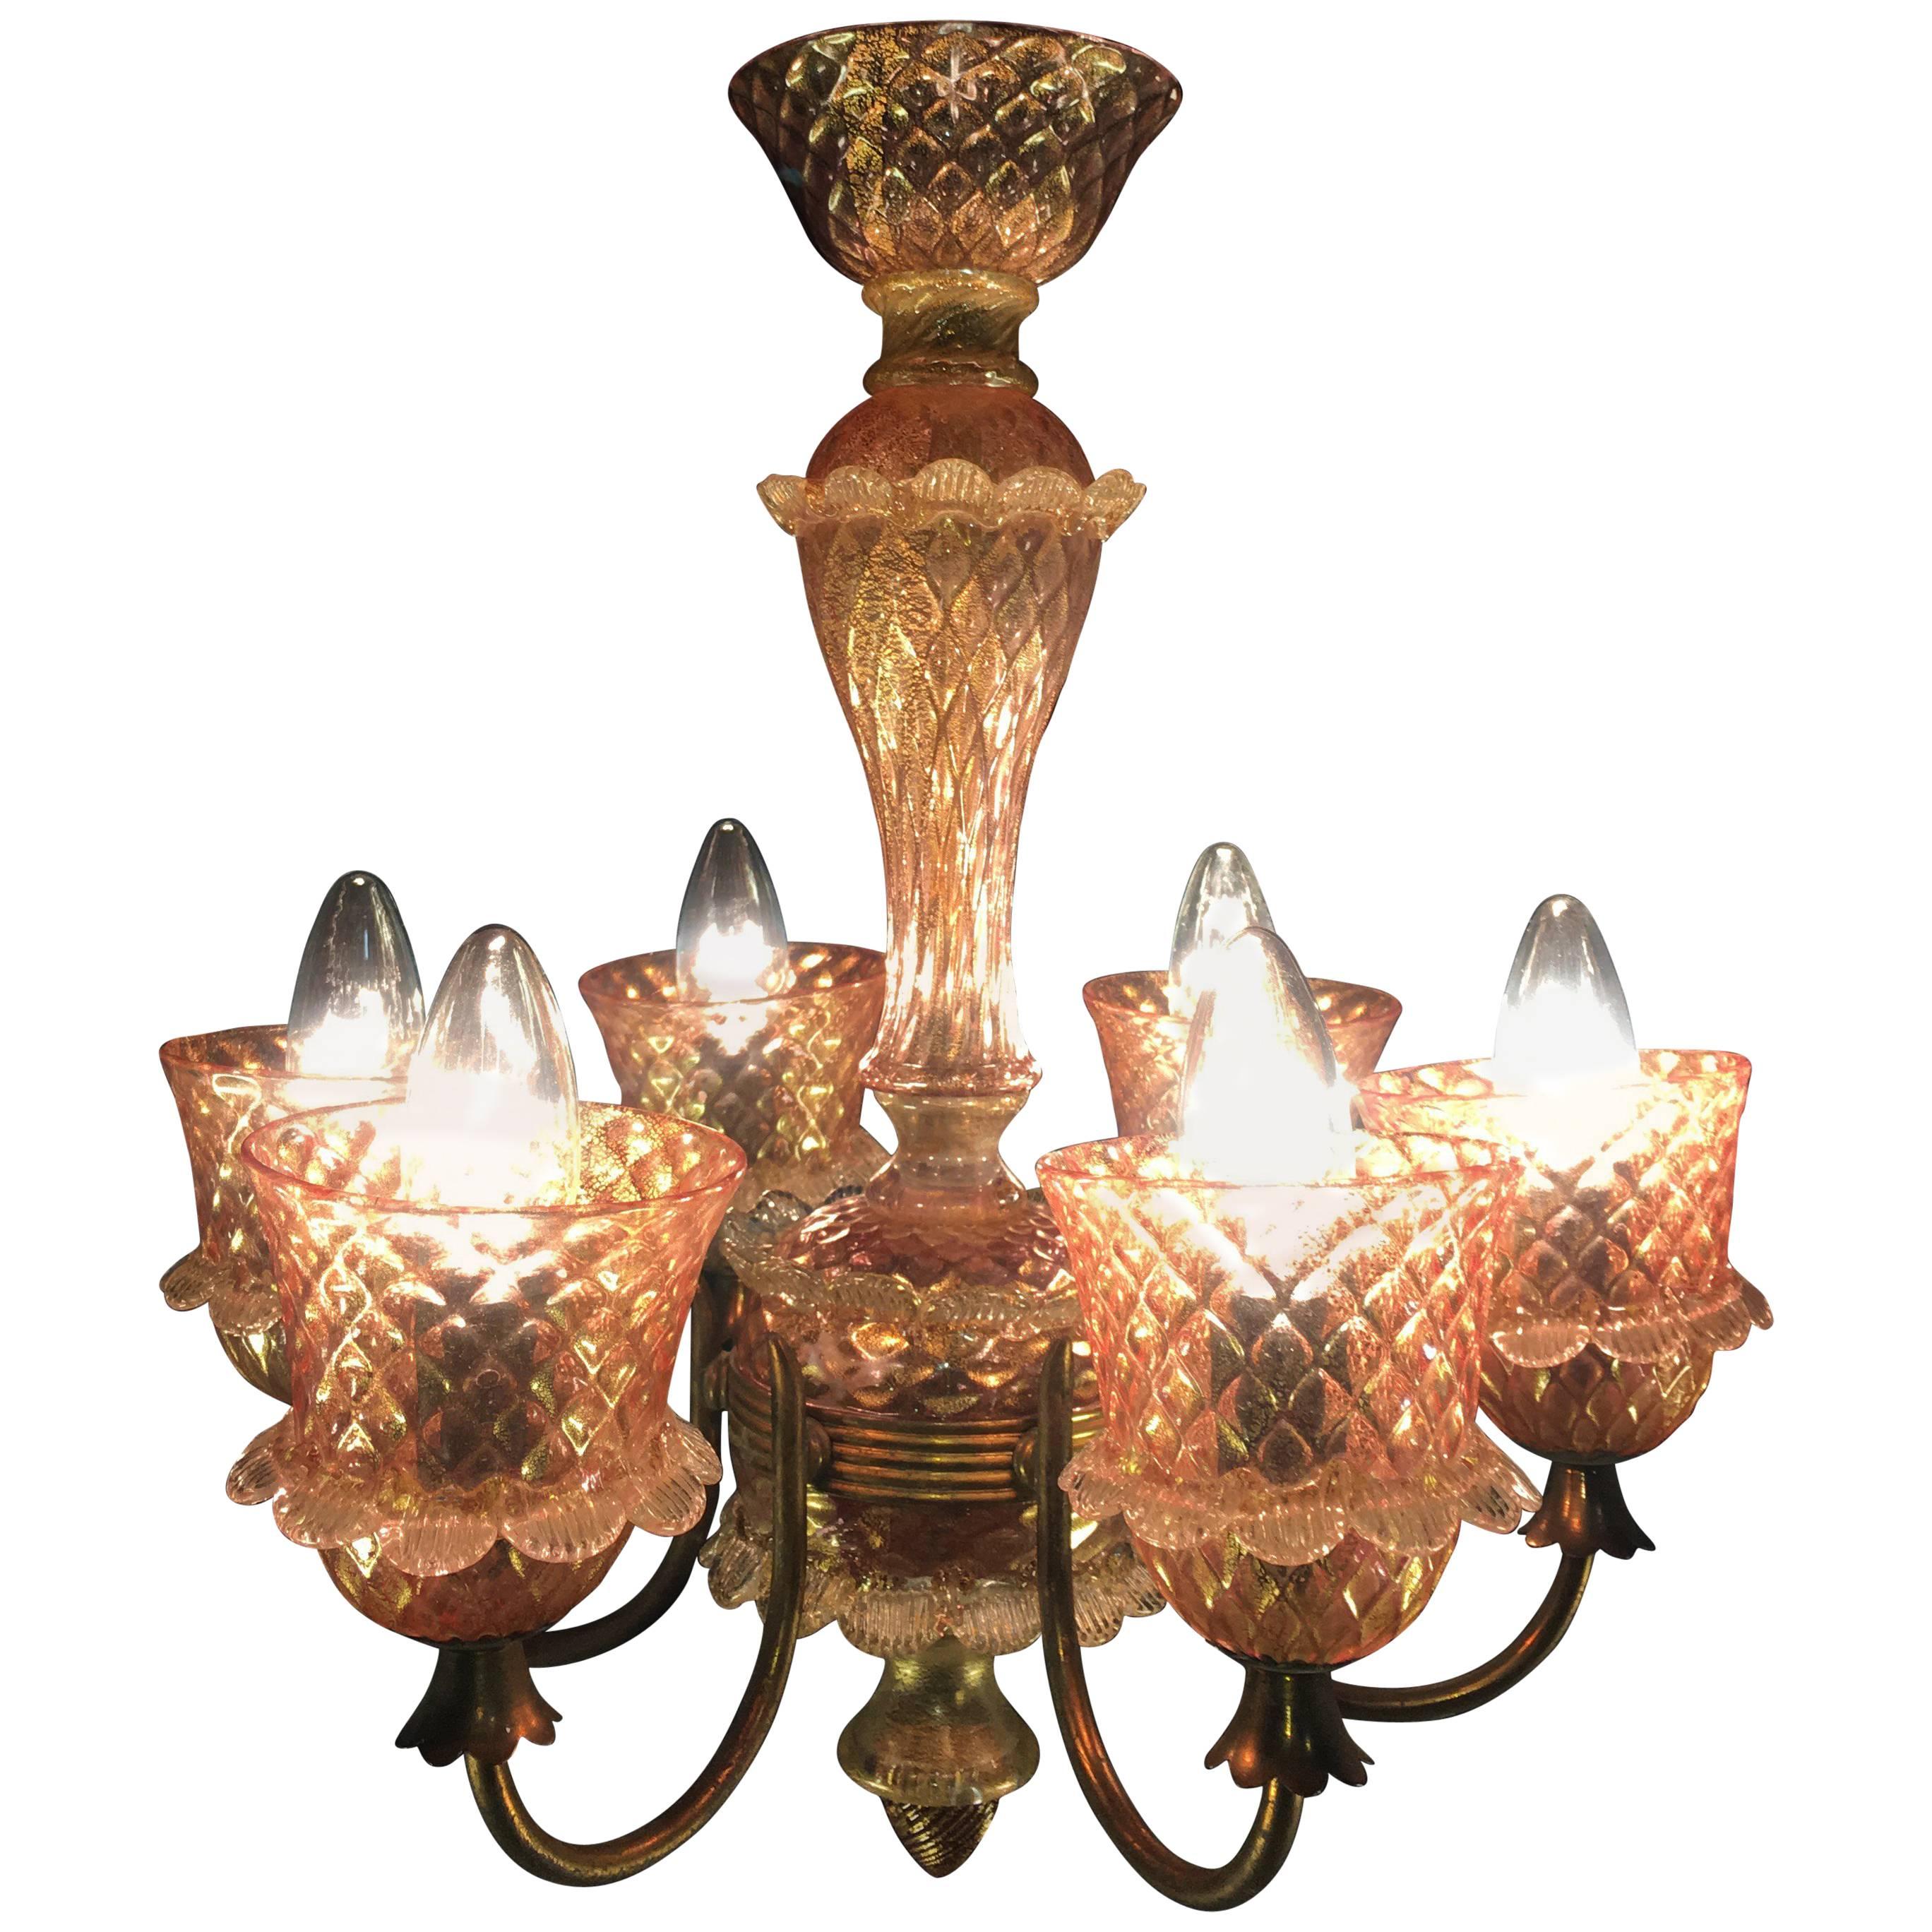 Charming chandelier by Barovier & Toso, 1950, blown Murano glass with gold inclusions. Six-light attack small.